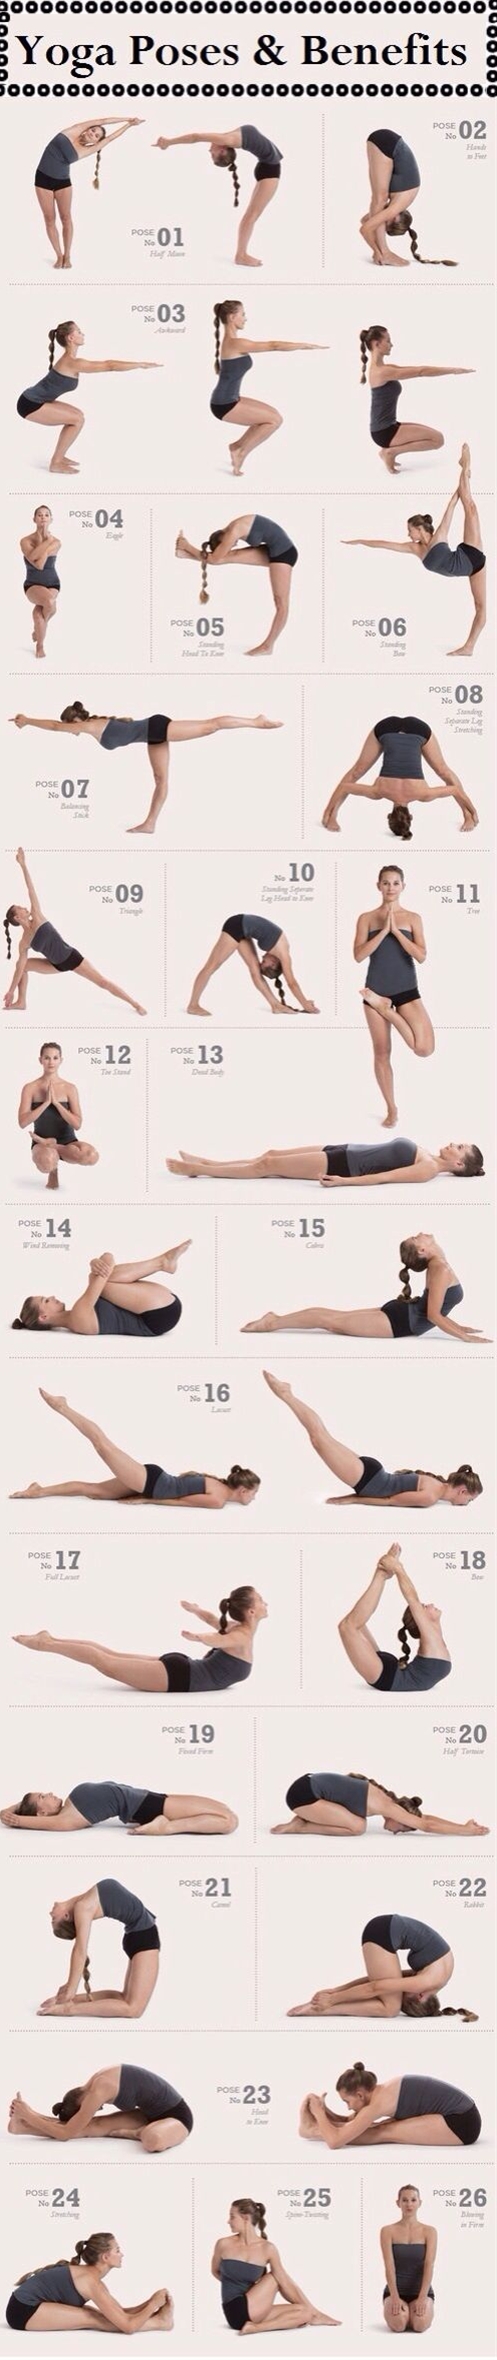 26 yoga exercises and their benefits